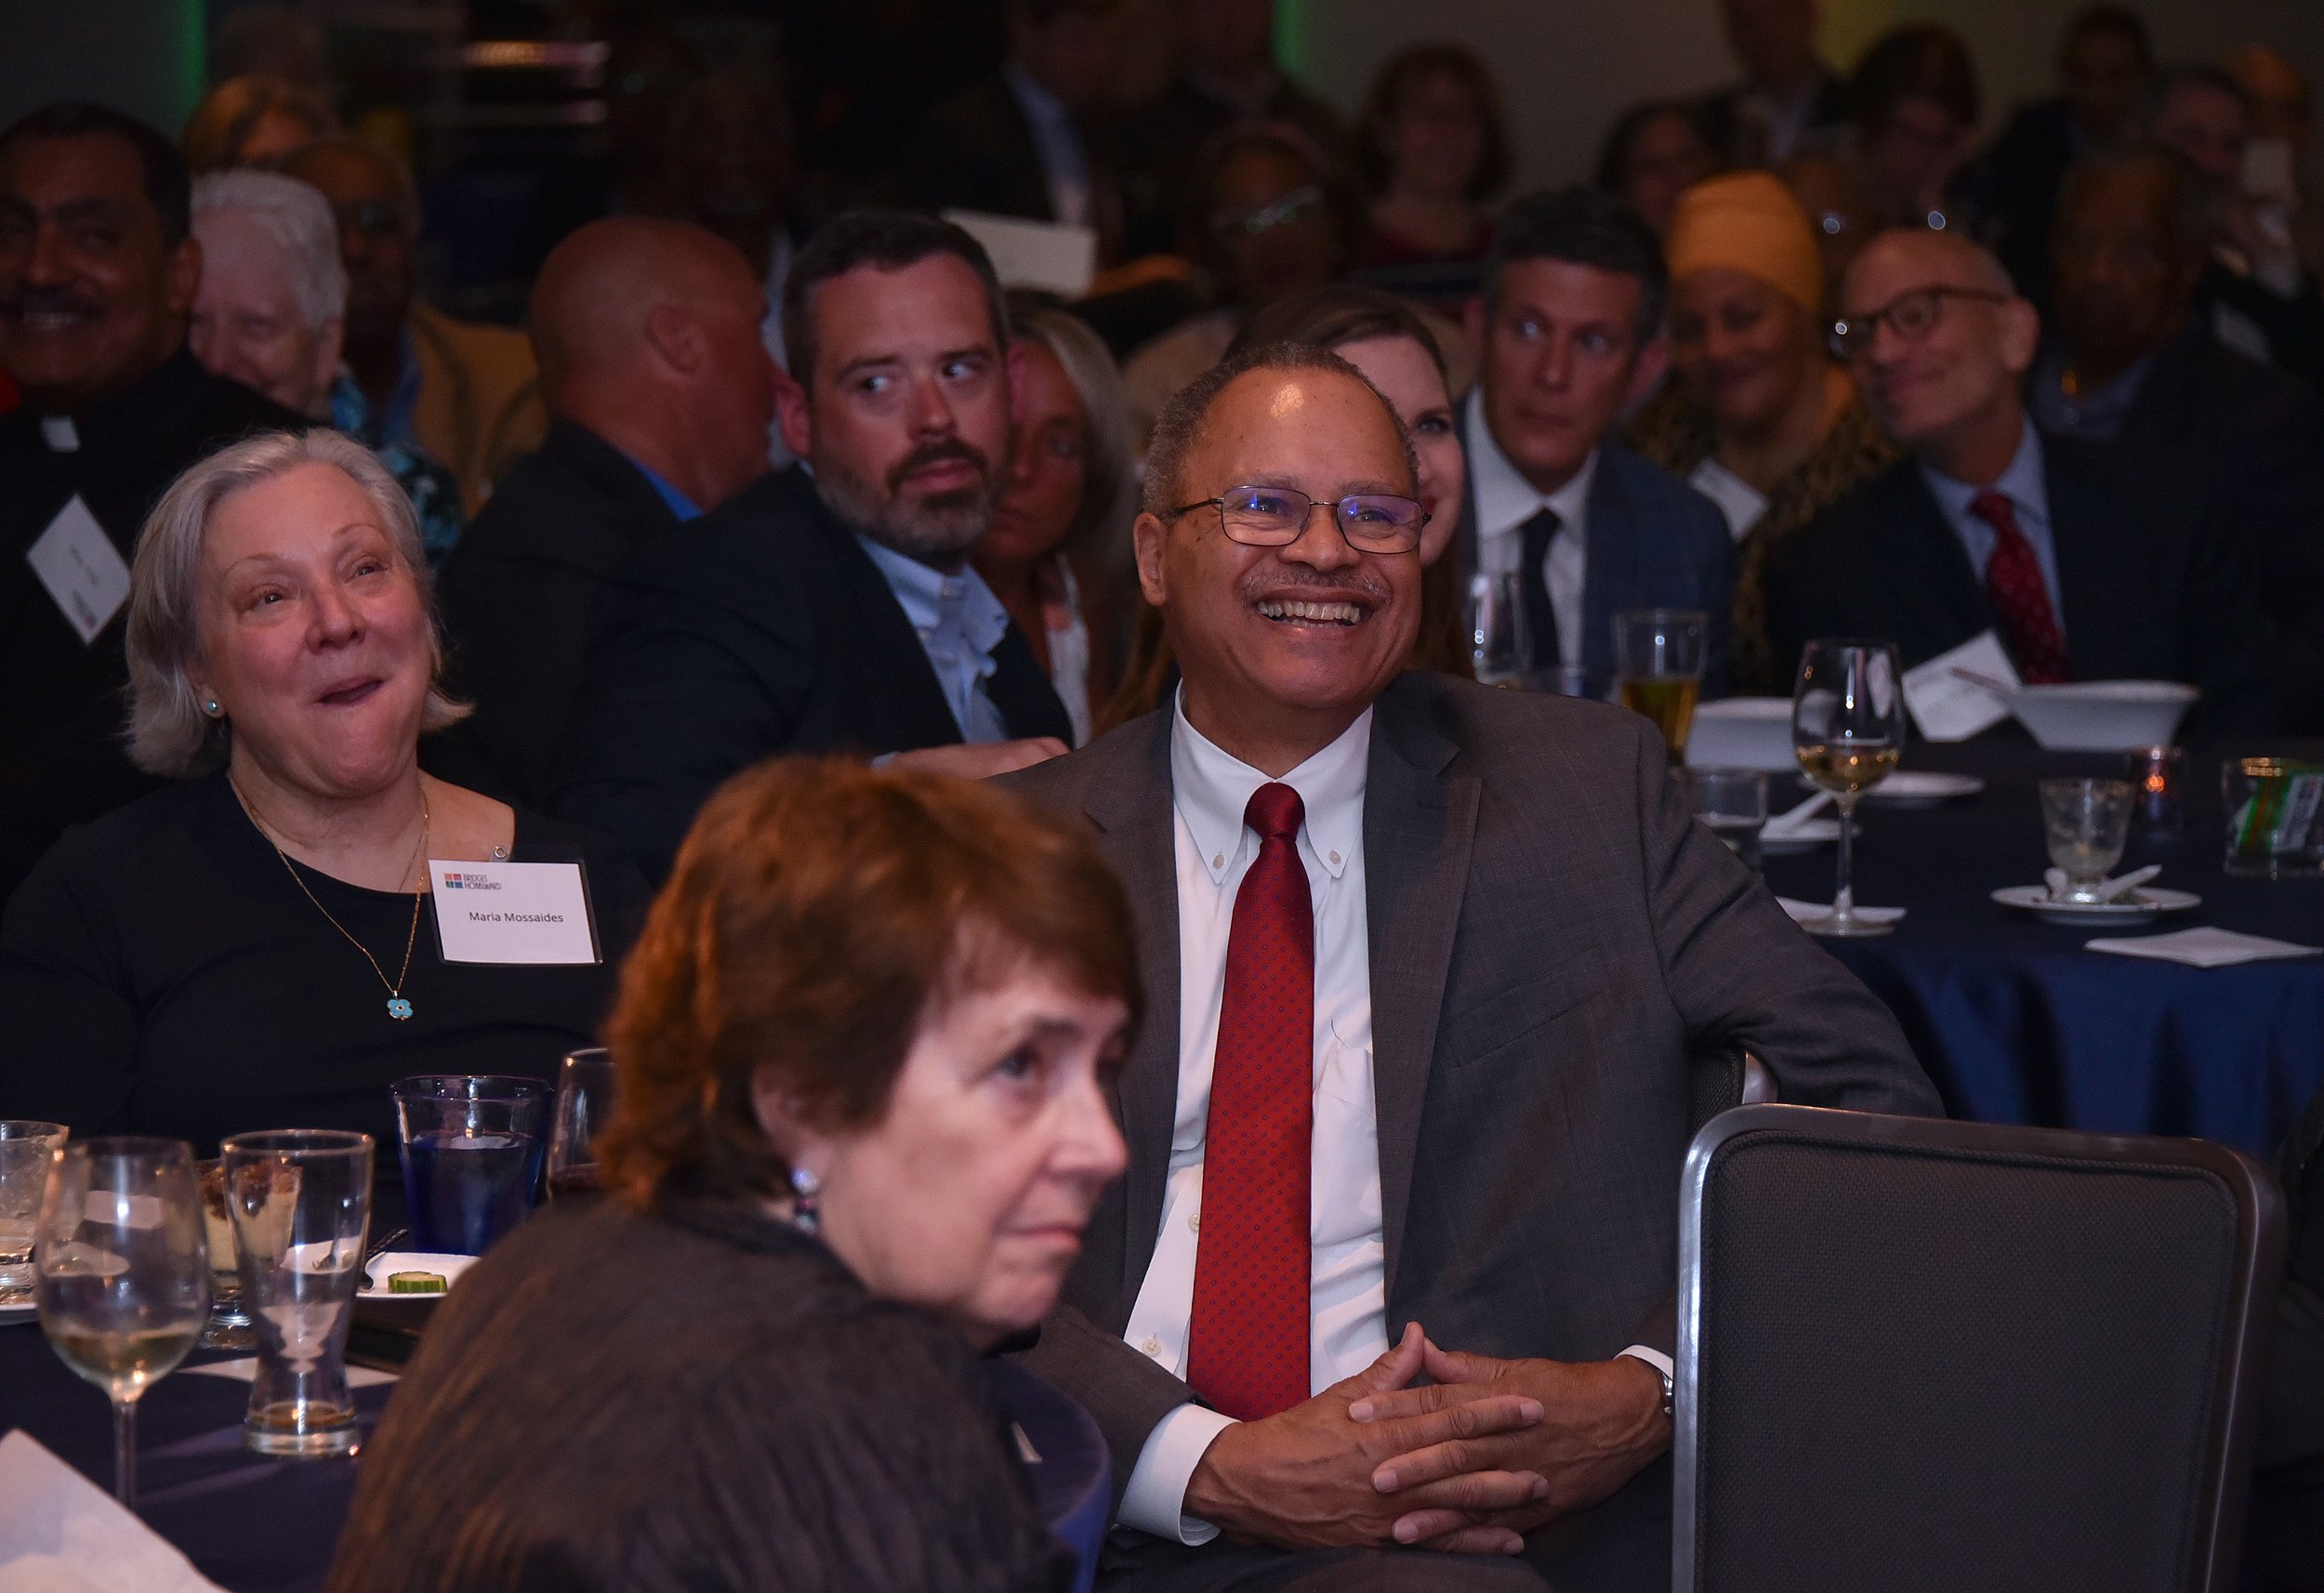 Bob Gittens smiling among the crowd at the Gala.